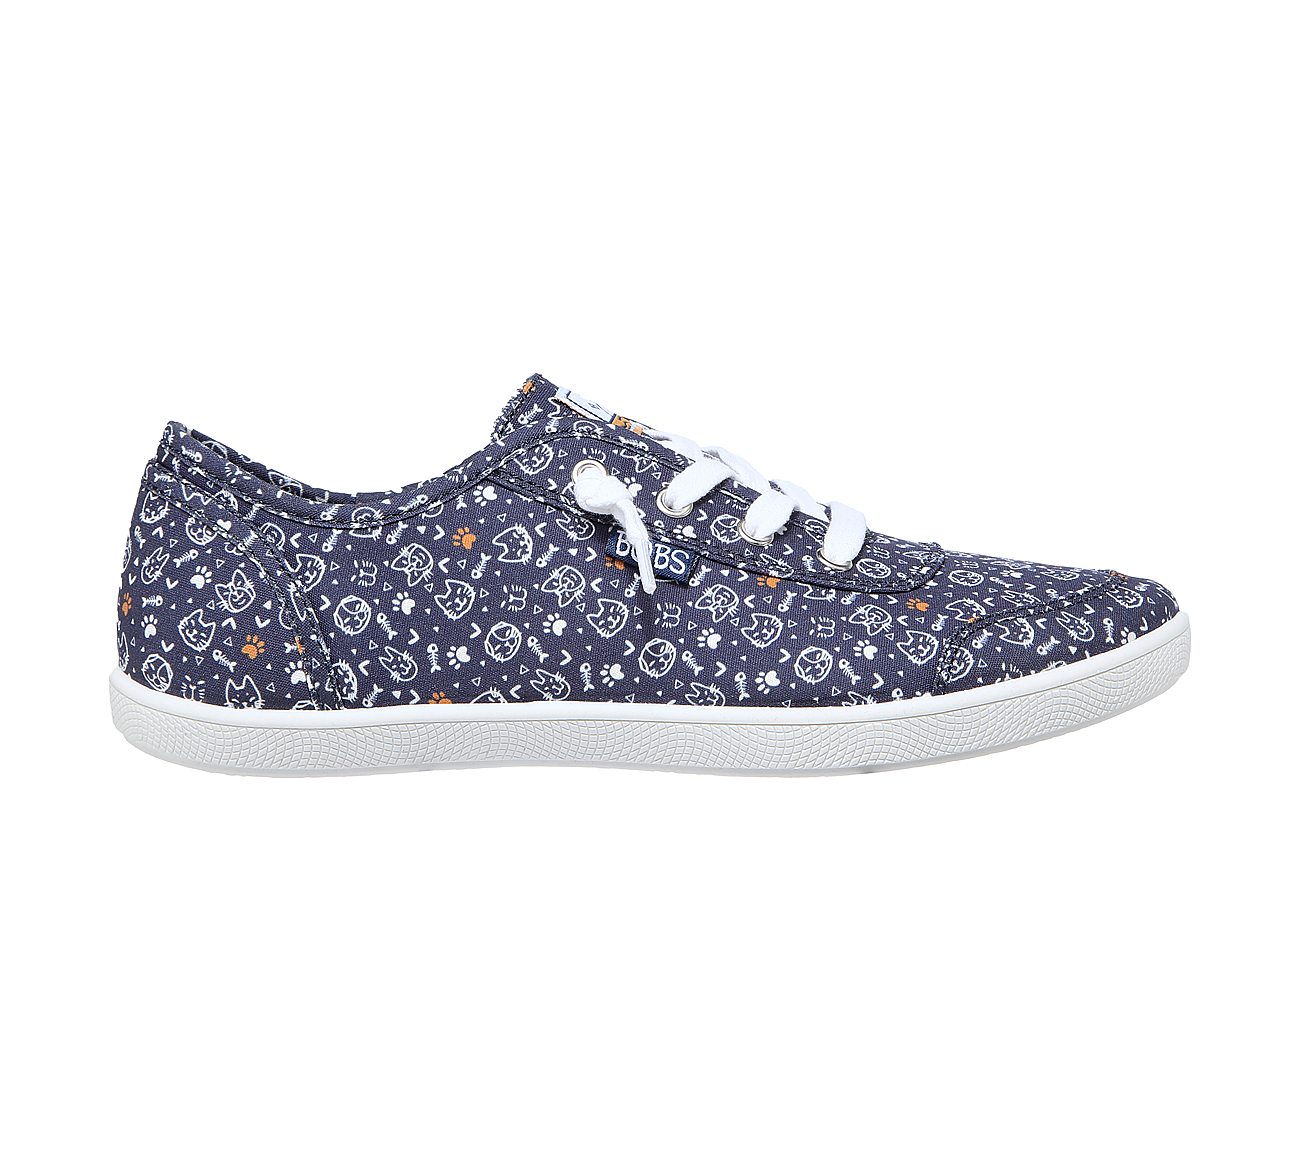 BOBS B CUTE - ITTY KITTY, NAVY/MULTI Footwear Lateral View